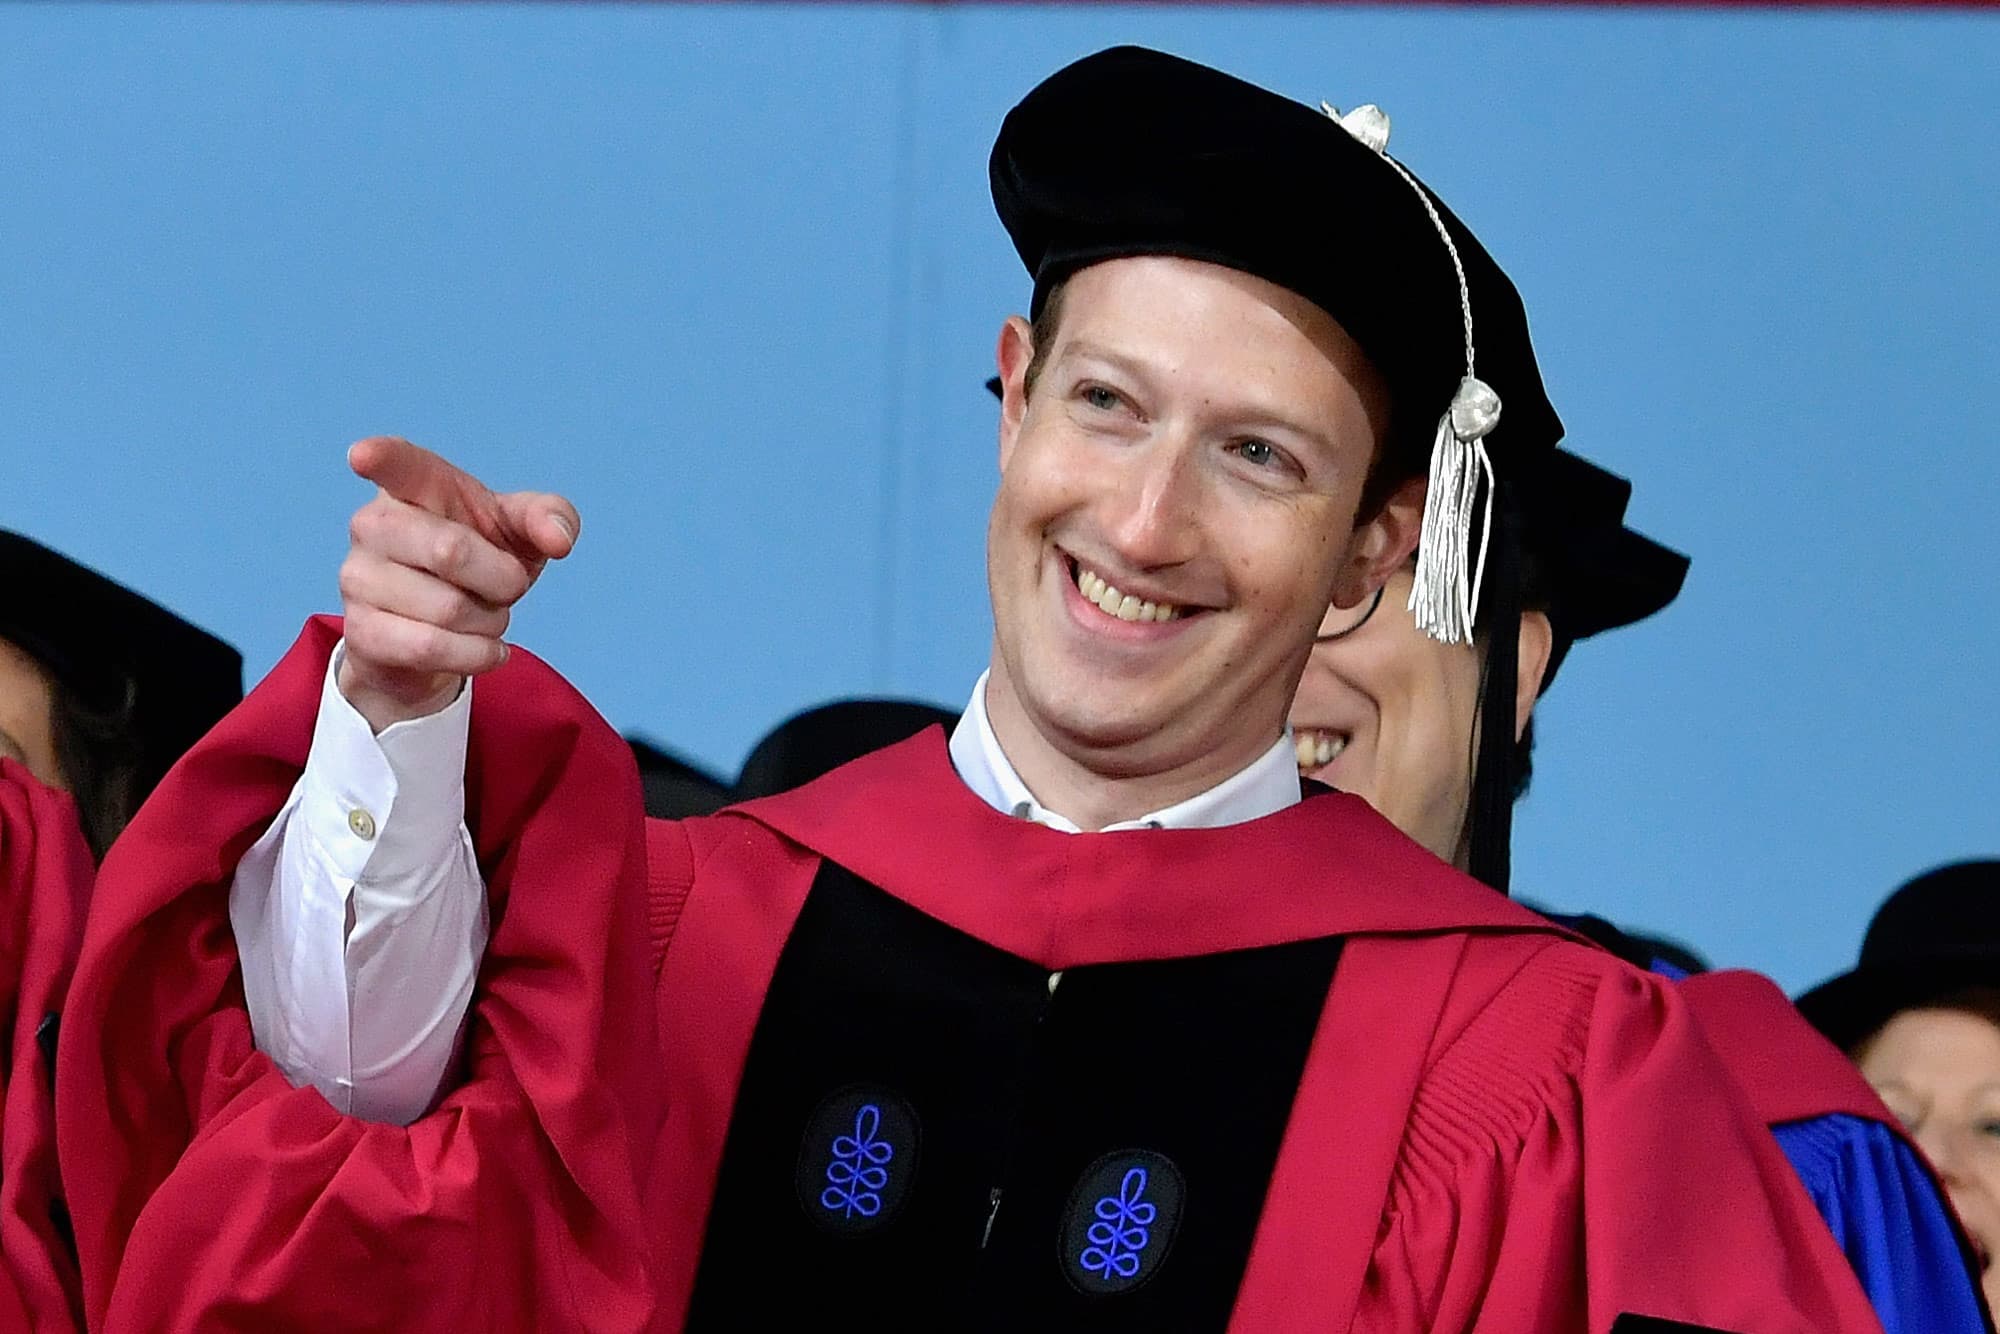 Mark Zuckerberg's dad said he could go to Harvard or have a McDonald's franchise